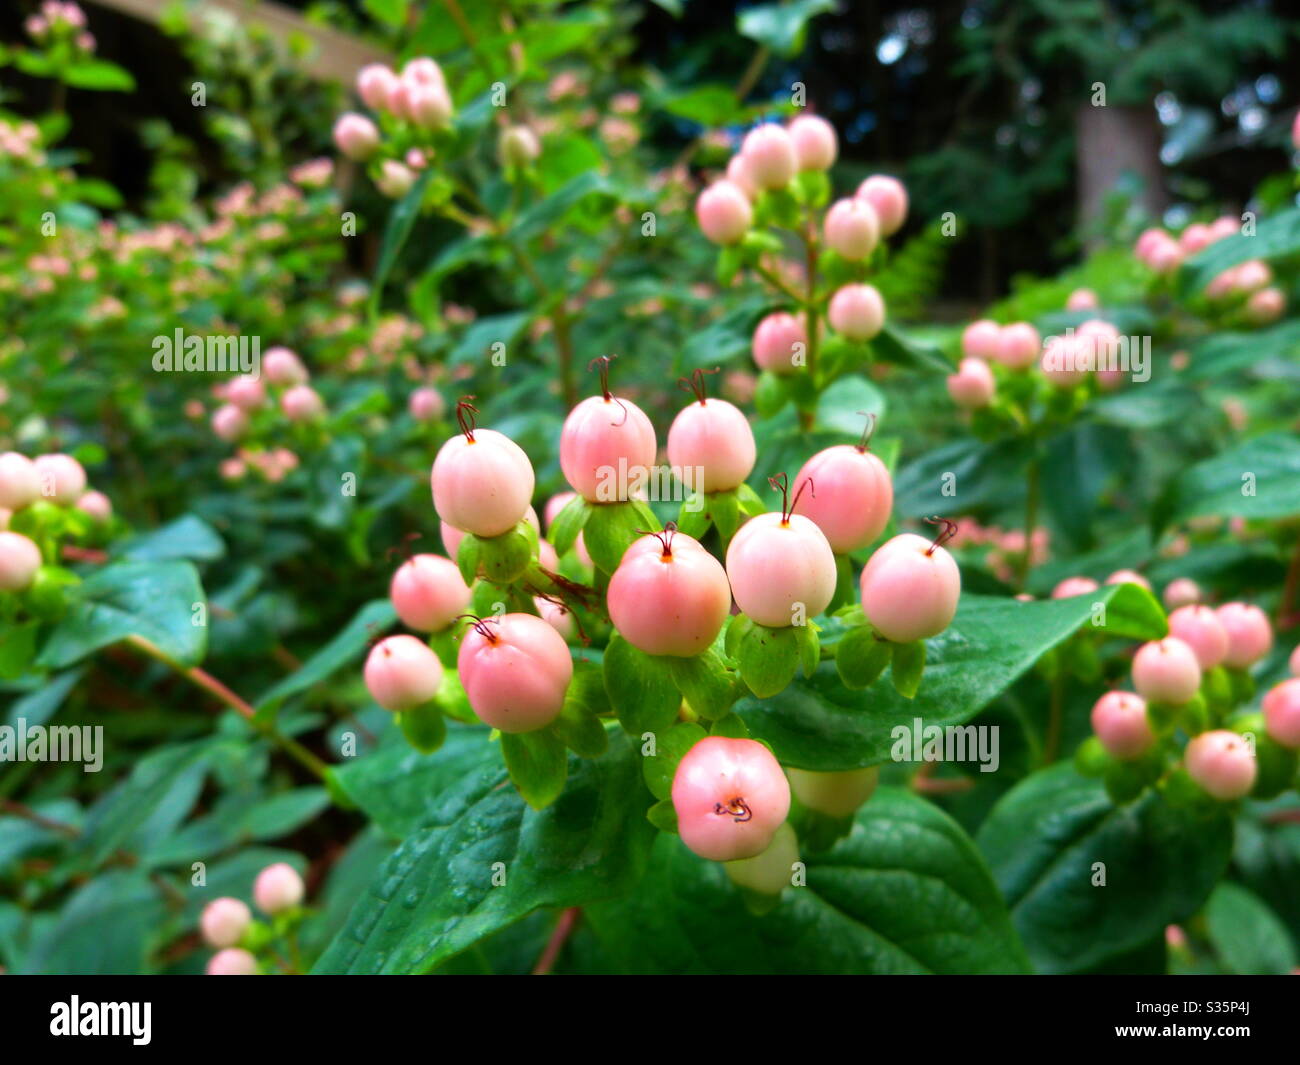 Pink berry flowers Stock Photo